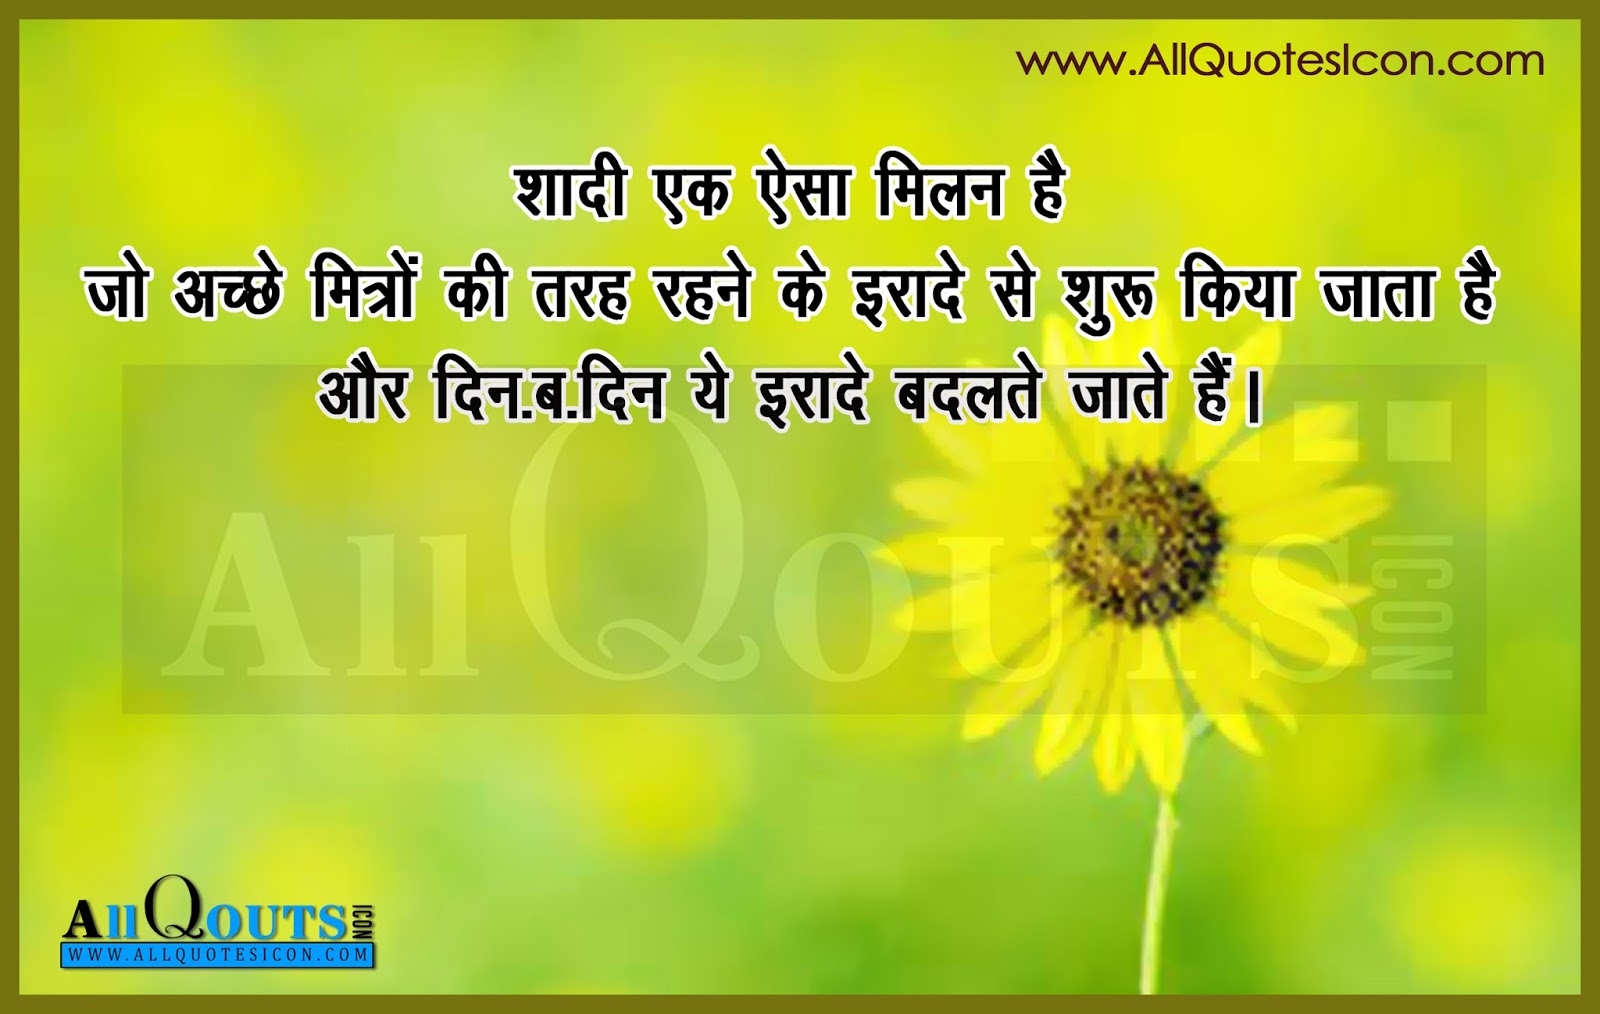 Funny Hindi Quotes Wallpapers s